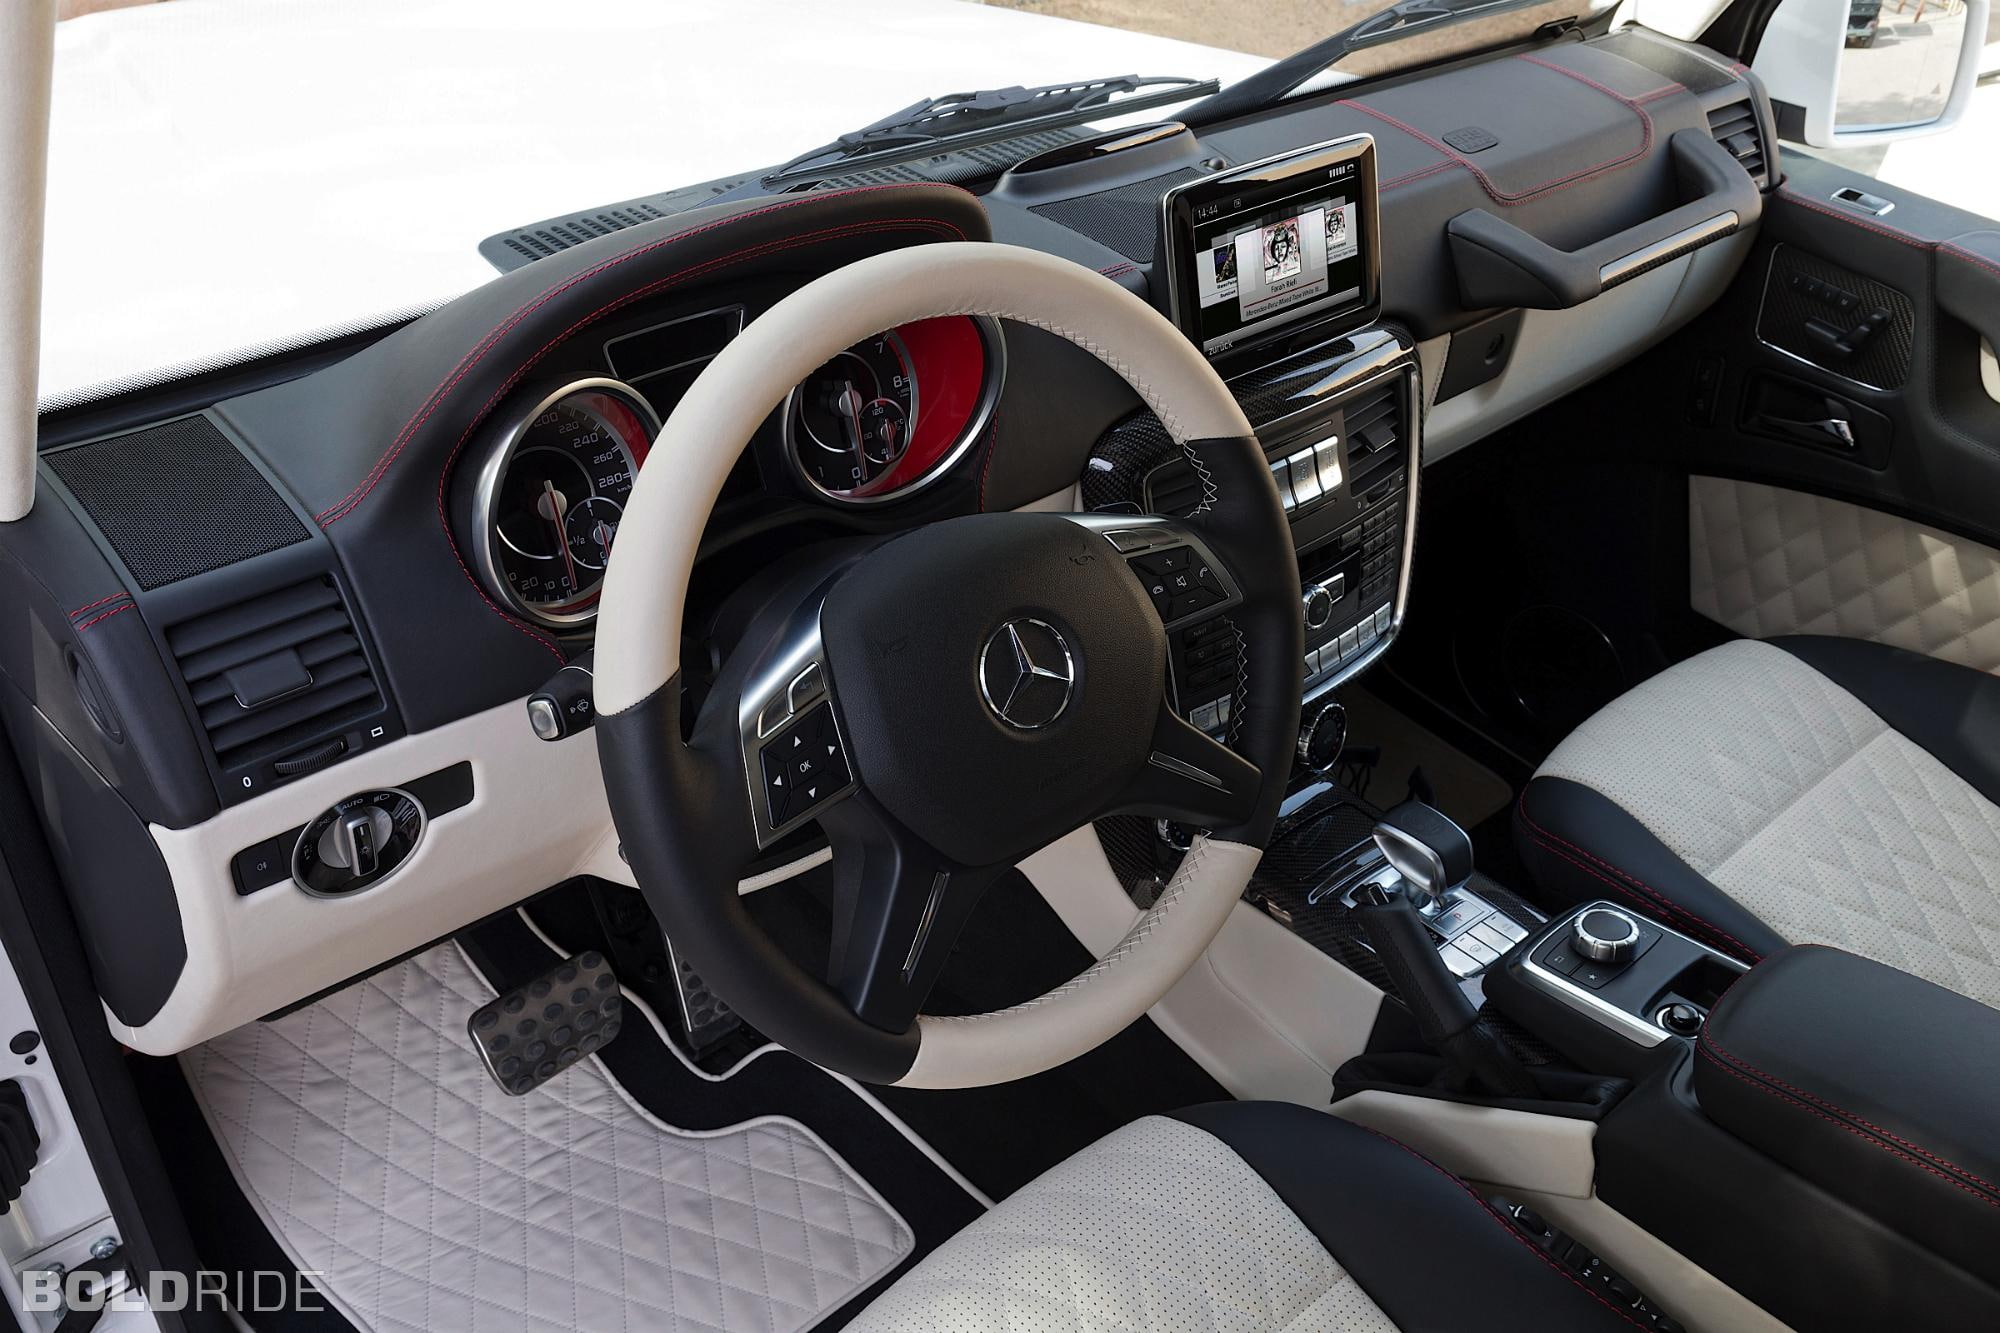 2013 Mercedes Benz G63 Amg 6x6 4x4 Offroad Suv Interior Steering Pictures For Desktop